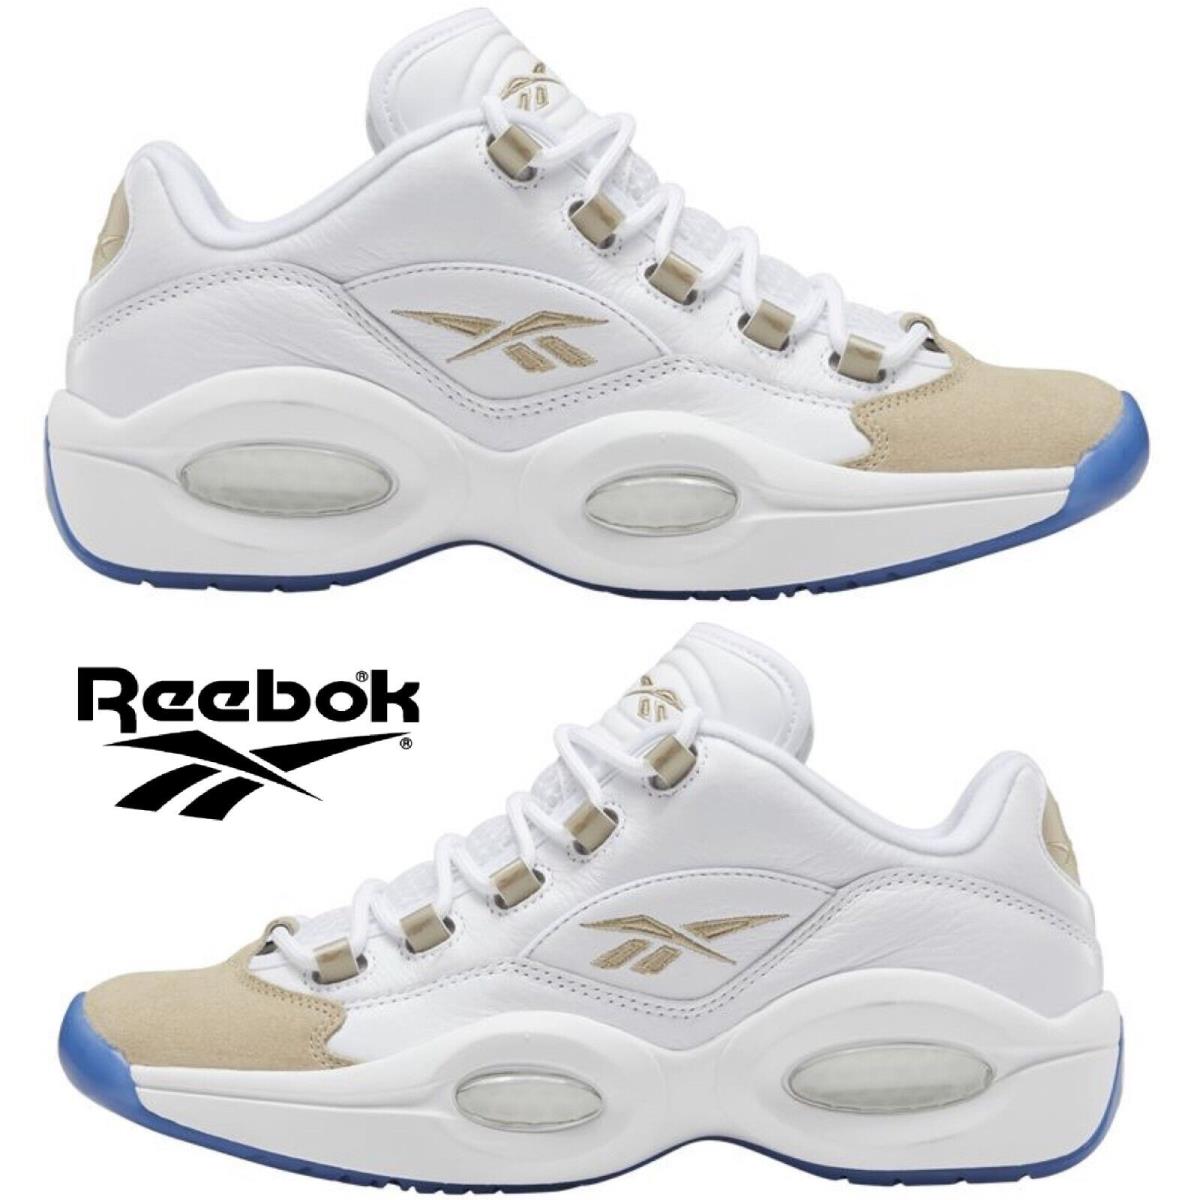 Reebok Question Low Basketball Shoes Men`s Sneakers Running Casual Sport White - White , White/Beige Manufacturer